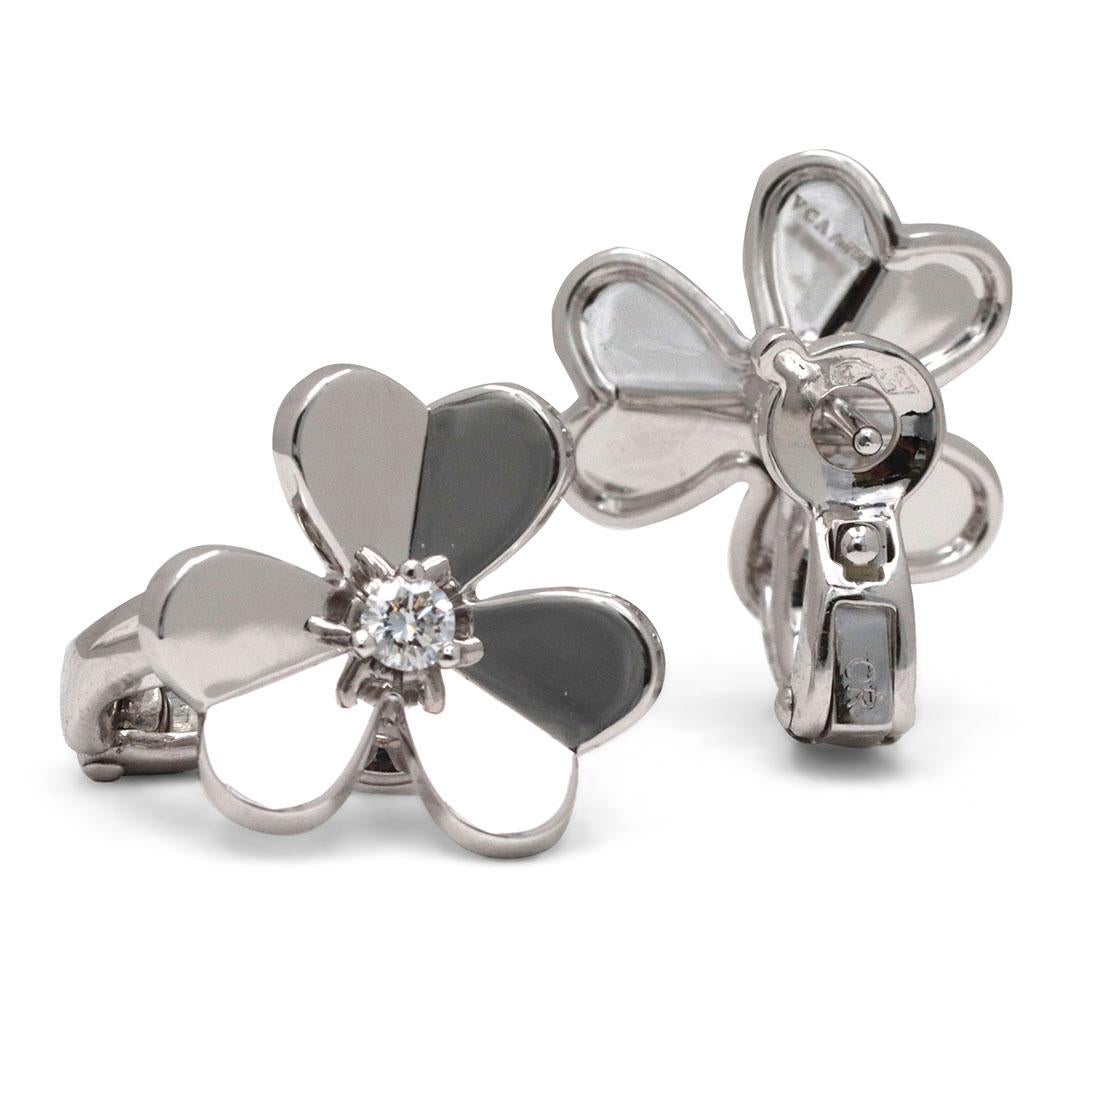 Authentic Van Cleef & Arpels 'Frivole' earrings feature mirror-polished 18 karat white gold heart-shaped petals set with a round brilliant cut diamond at the center (0.17 carats total, E-F color, VS clarity). Signed VCA, Au750, with serial number